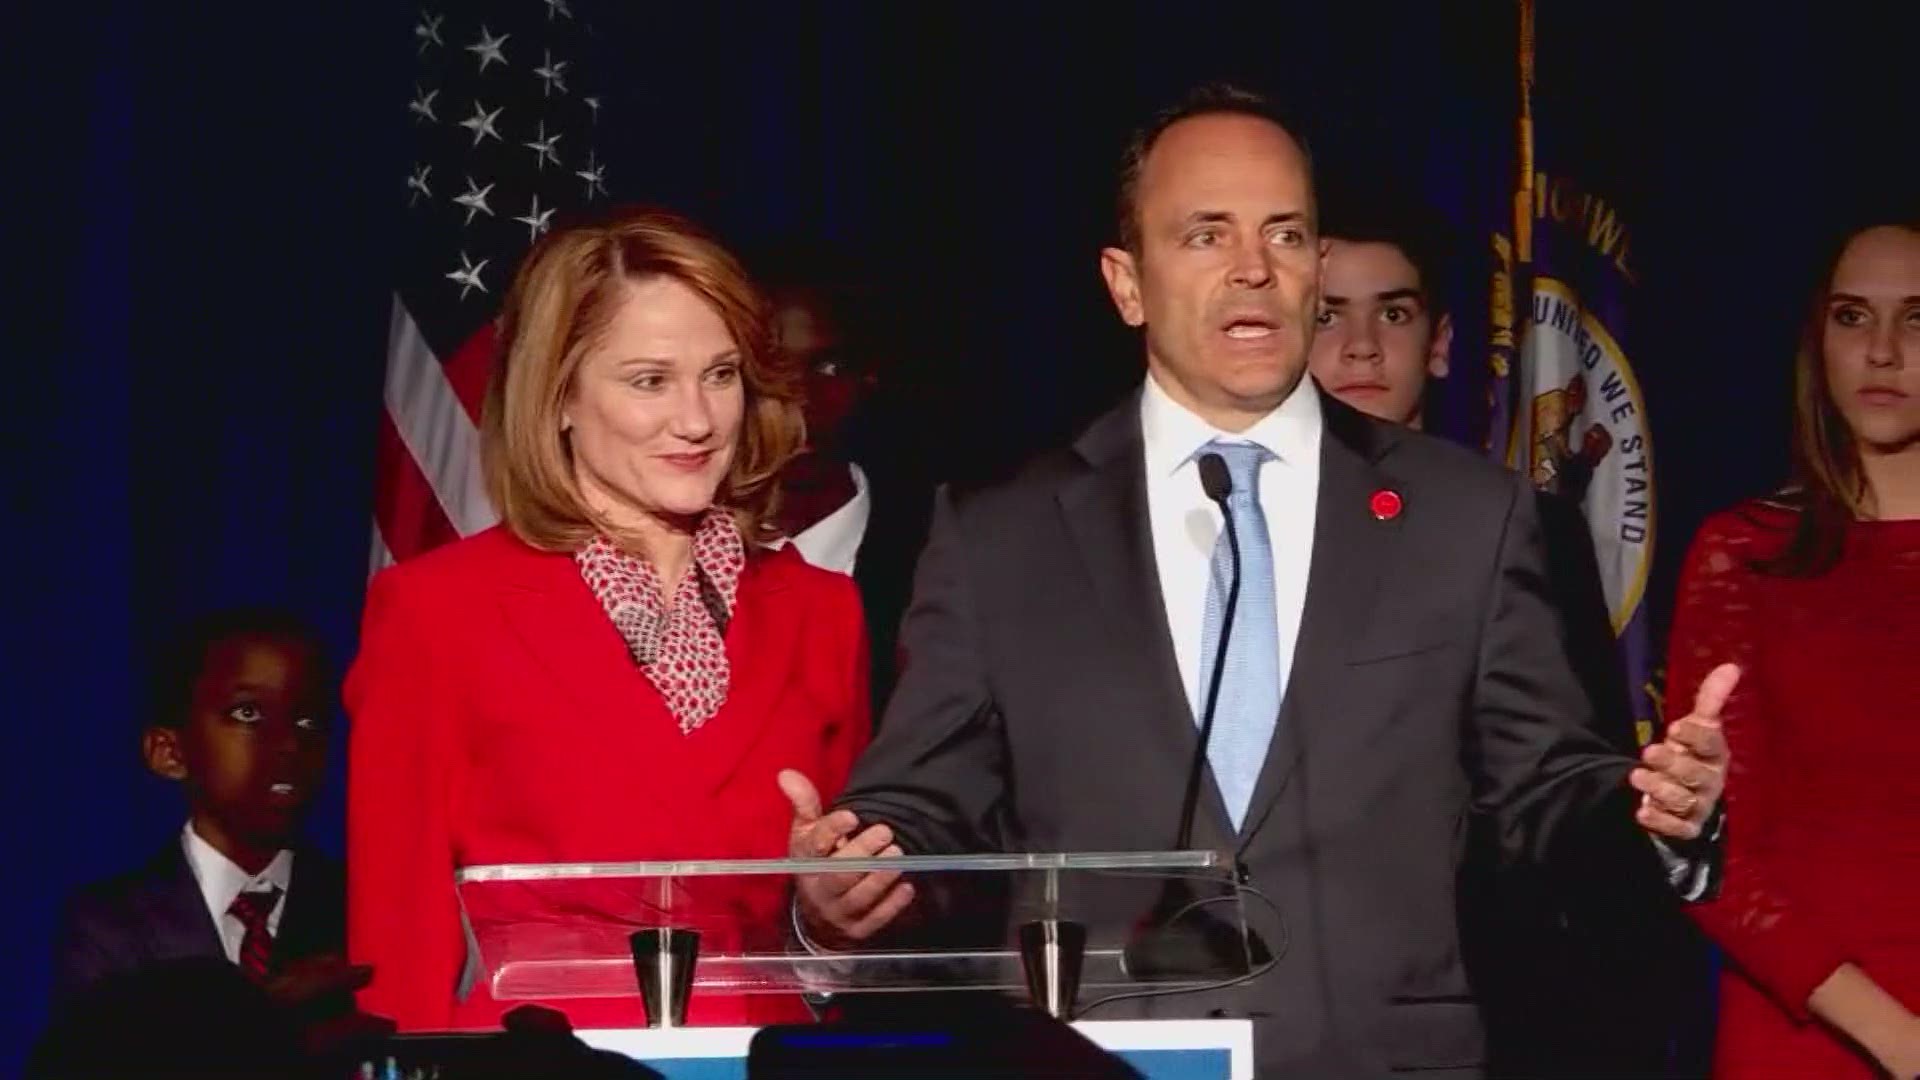 While Beshear has declared victory, Bevin says there is no chance he will concede.